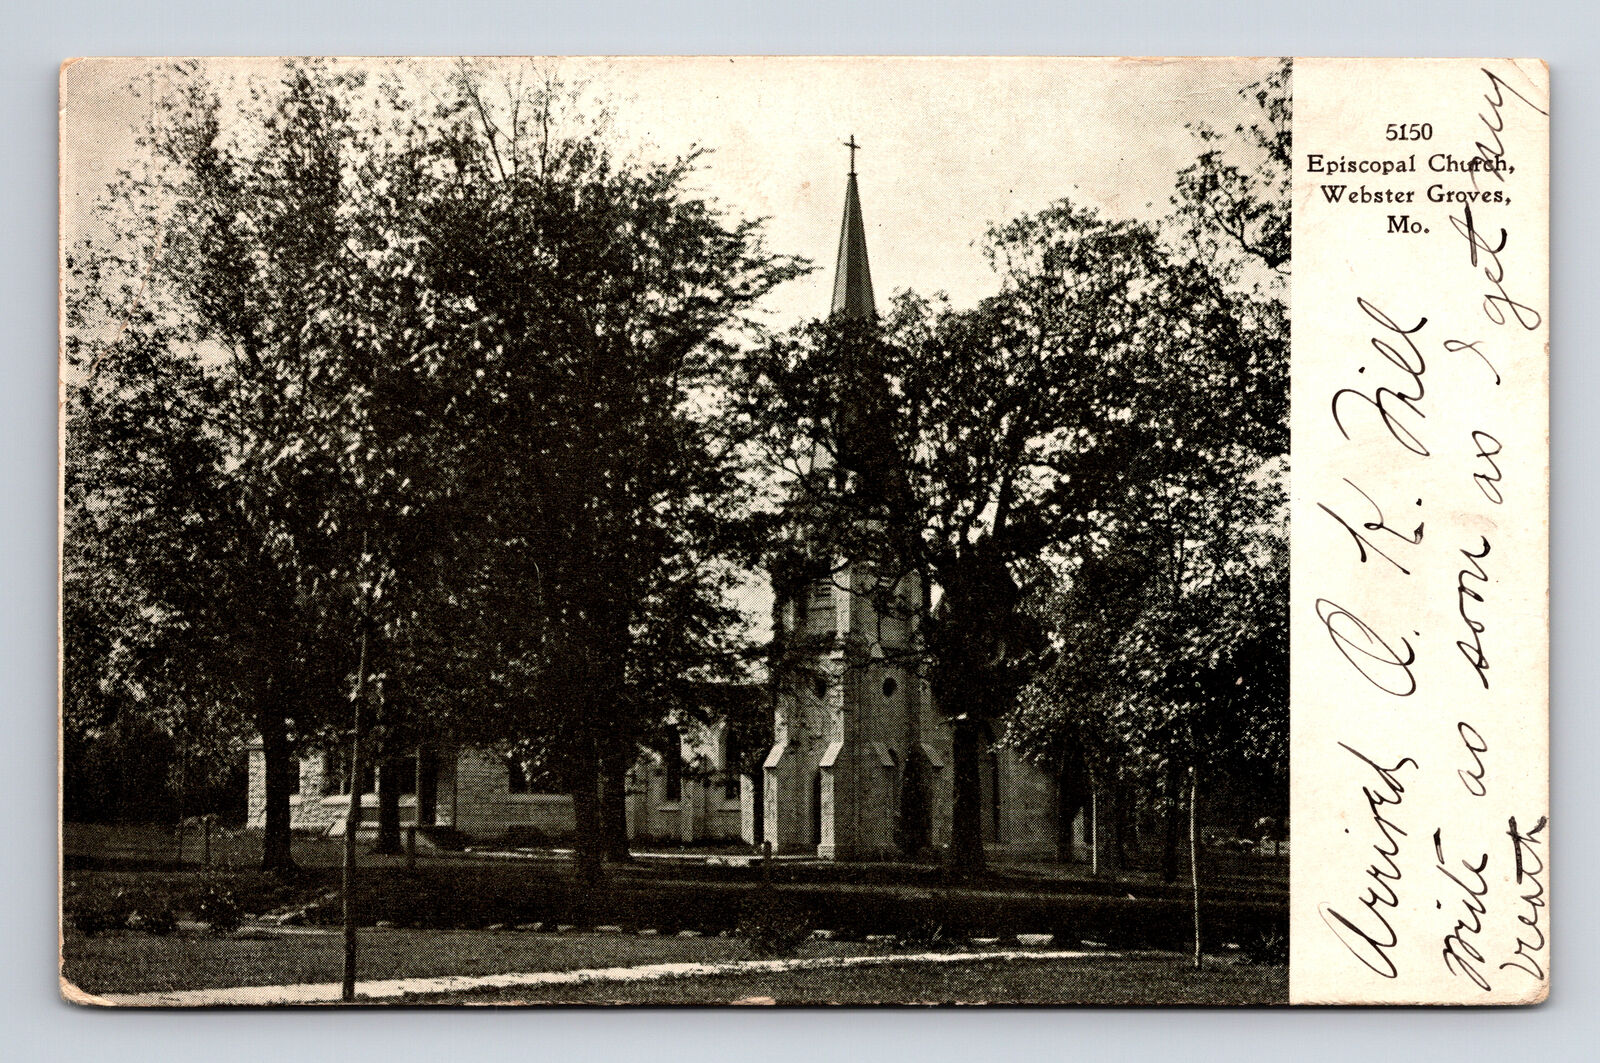 1908 Episcopal Church Webster Groves MO St Louis County Adolph Selige Postcard